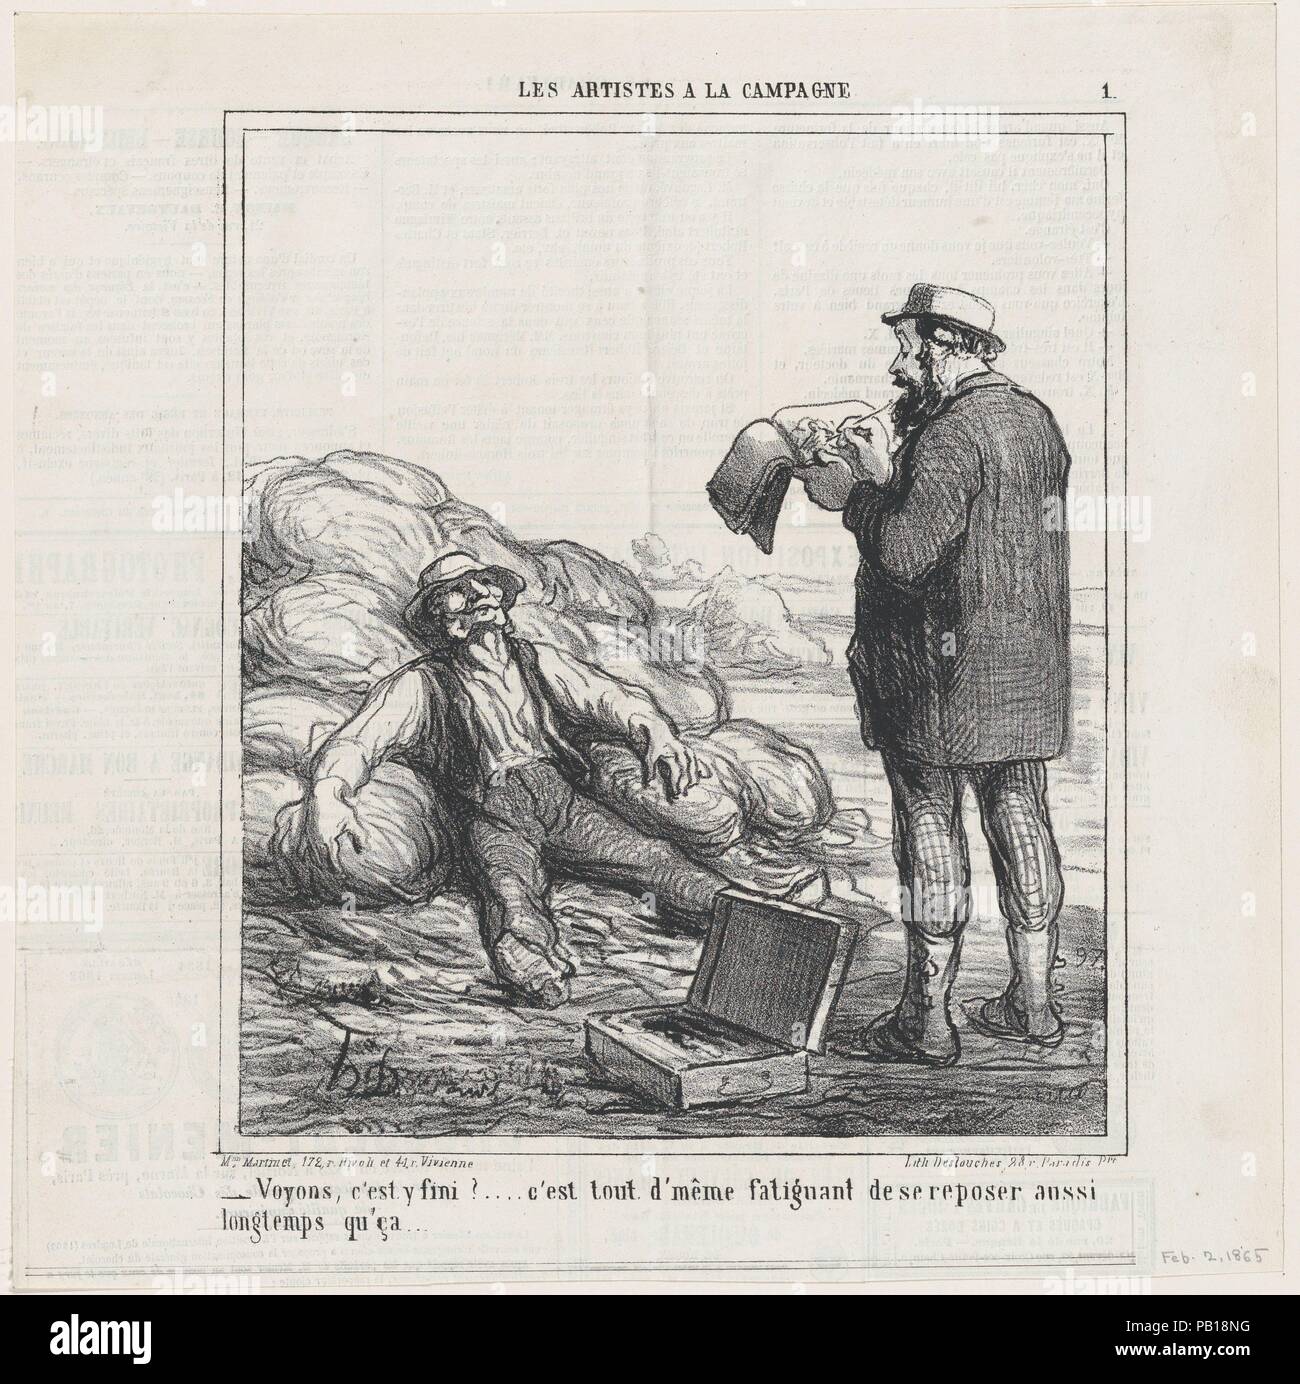 Well, are you finally finished?... after all, it's tiring to relax for such a long time, from 'The countryside artists,' published in Le Charivari, February 2, 1865. Artist: Honoré Daumier (French, Marseilles 1808-1879 Valmondois). Dimensions: Image: 9 1/8 × 7 7/8 in. (23.1 × 20 cm)  Sheet: 11 9/16 × 11 9/16 in. (29.3 × 29.3 cm). Printer: Destouches (Paris). Publisher: Aaron Martinet (French, 1762-1841). Series/Portfolio: 'The countryside artists' (Les artistes a la campagne). Date: February 2, 1865. Museum: Metropolitan Museum of Art, New York, USA. Stock Photo